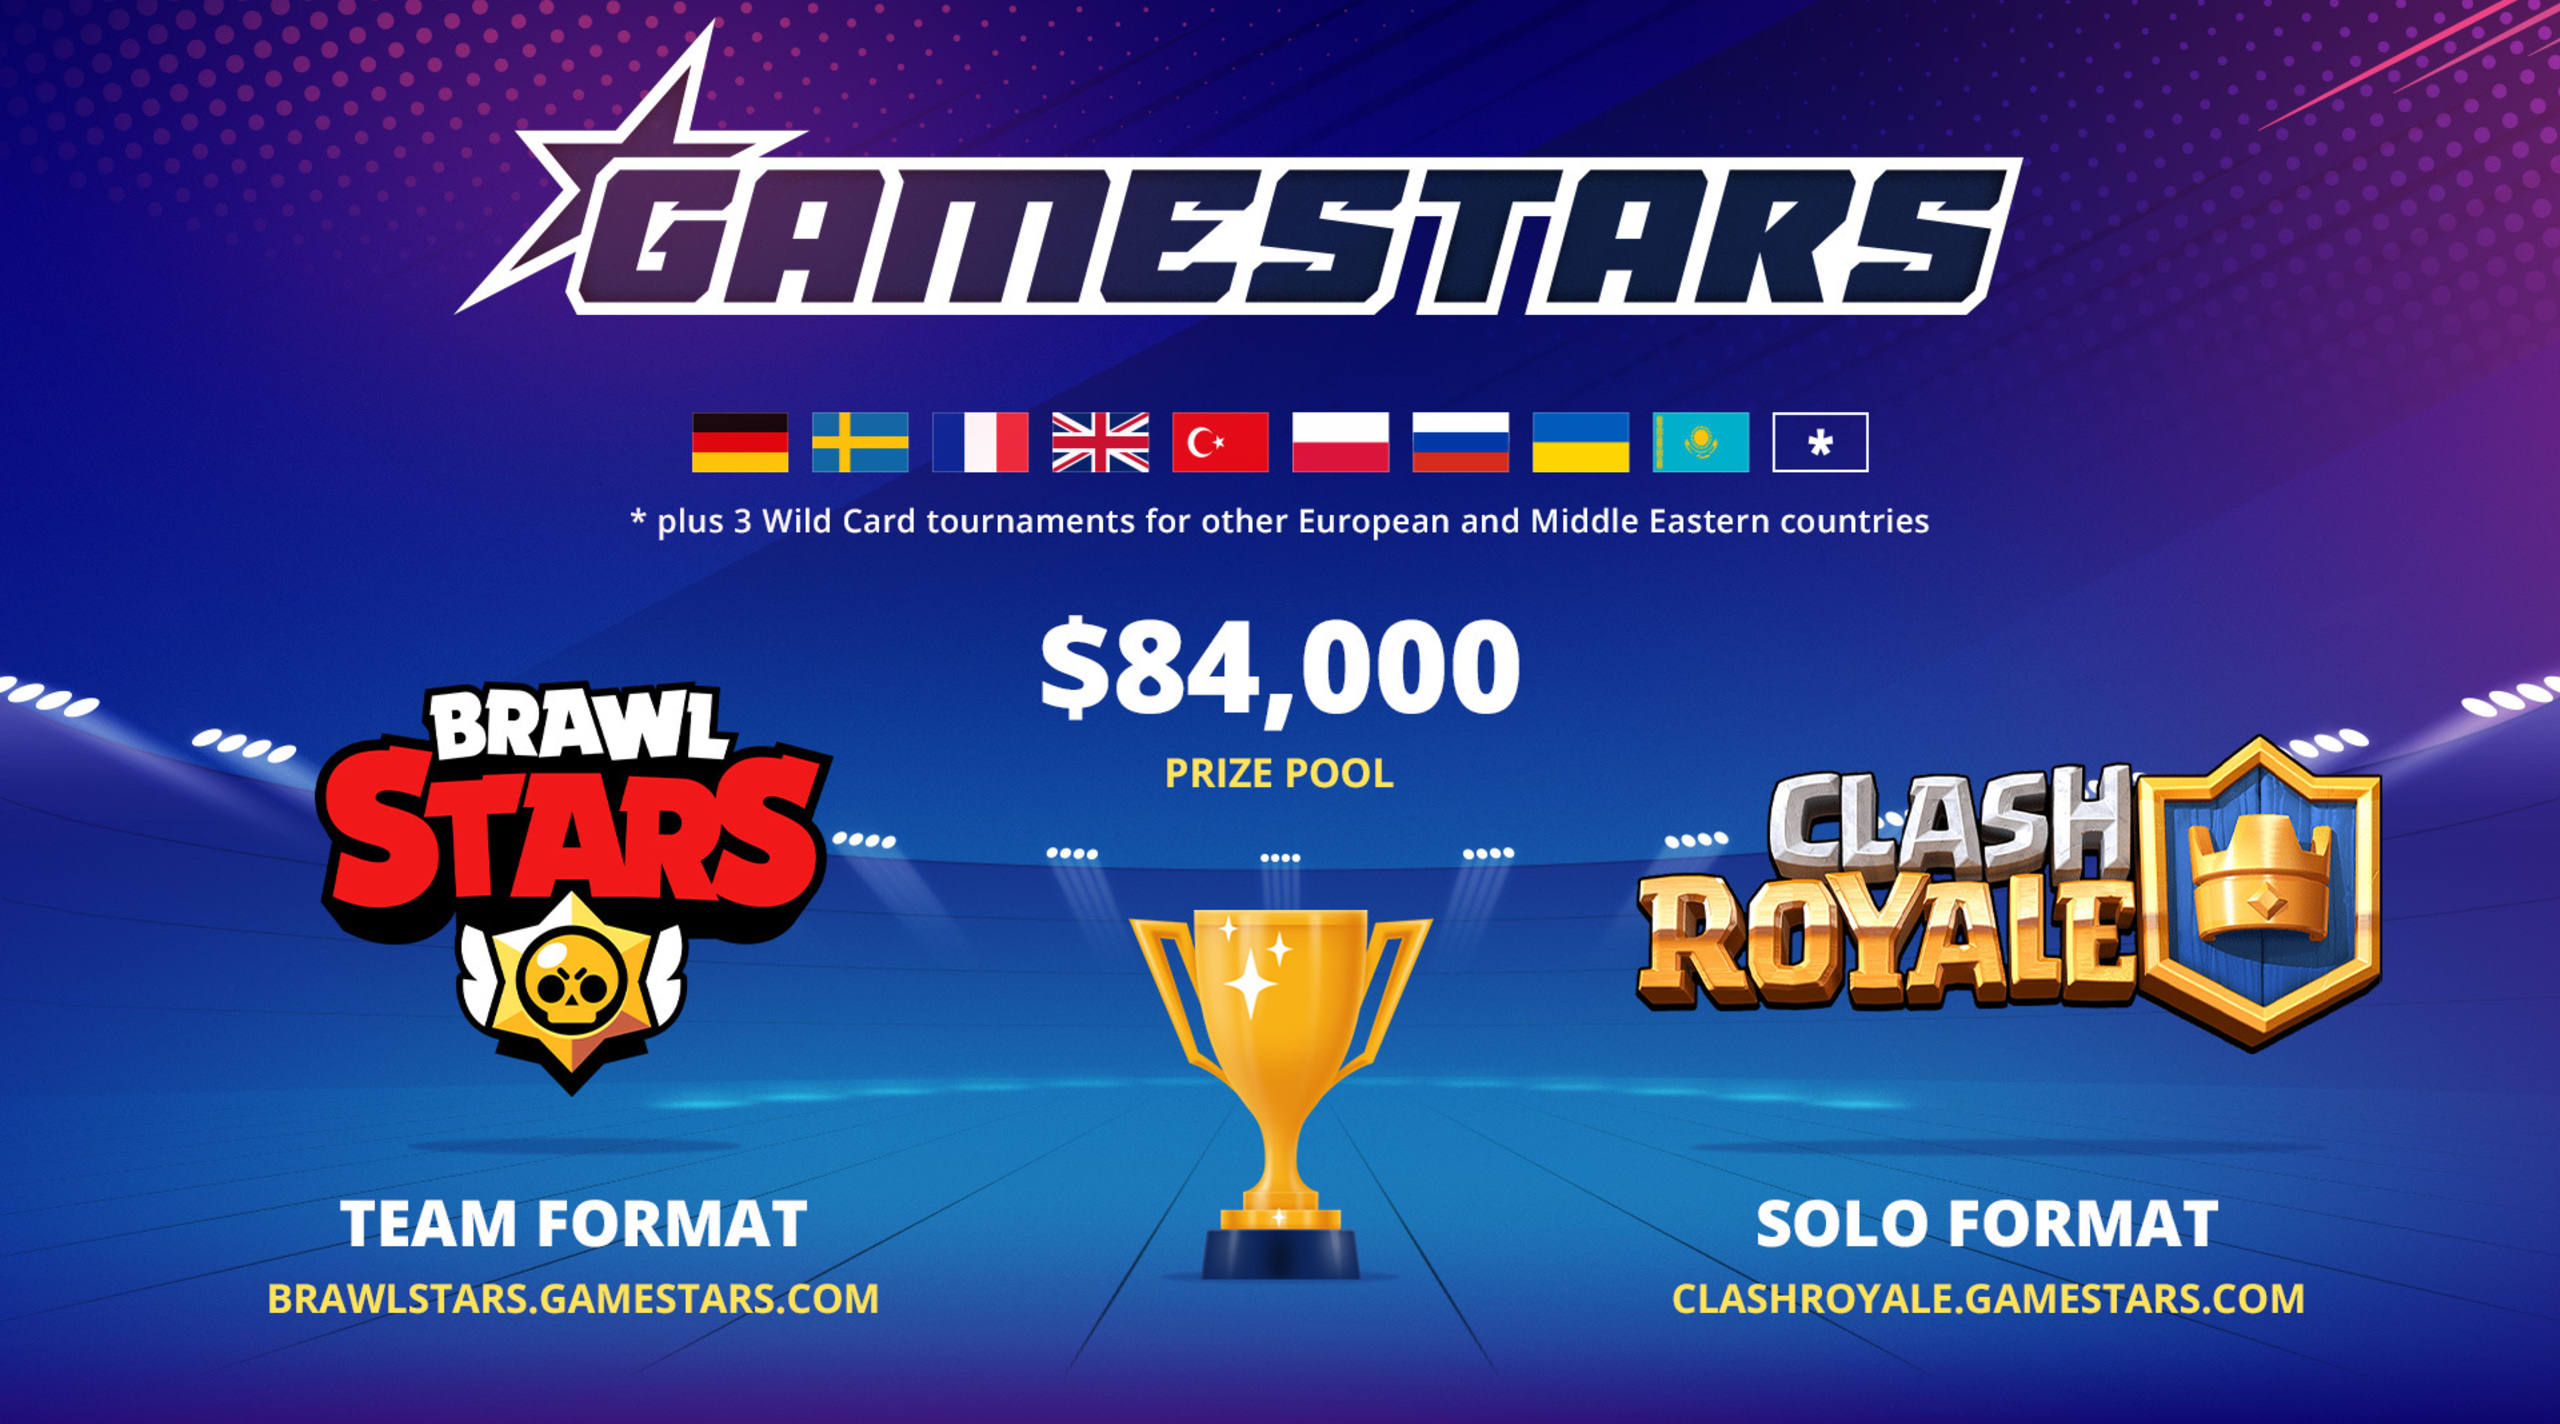 Starladder To Launch The First Season Of Gamestars League For The Brawl Stars And Clash Royale Players Starladder - tabela open brasil brawl stars 2021